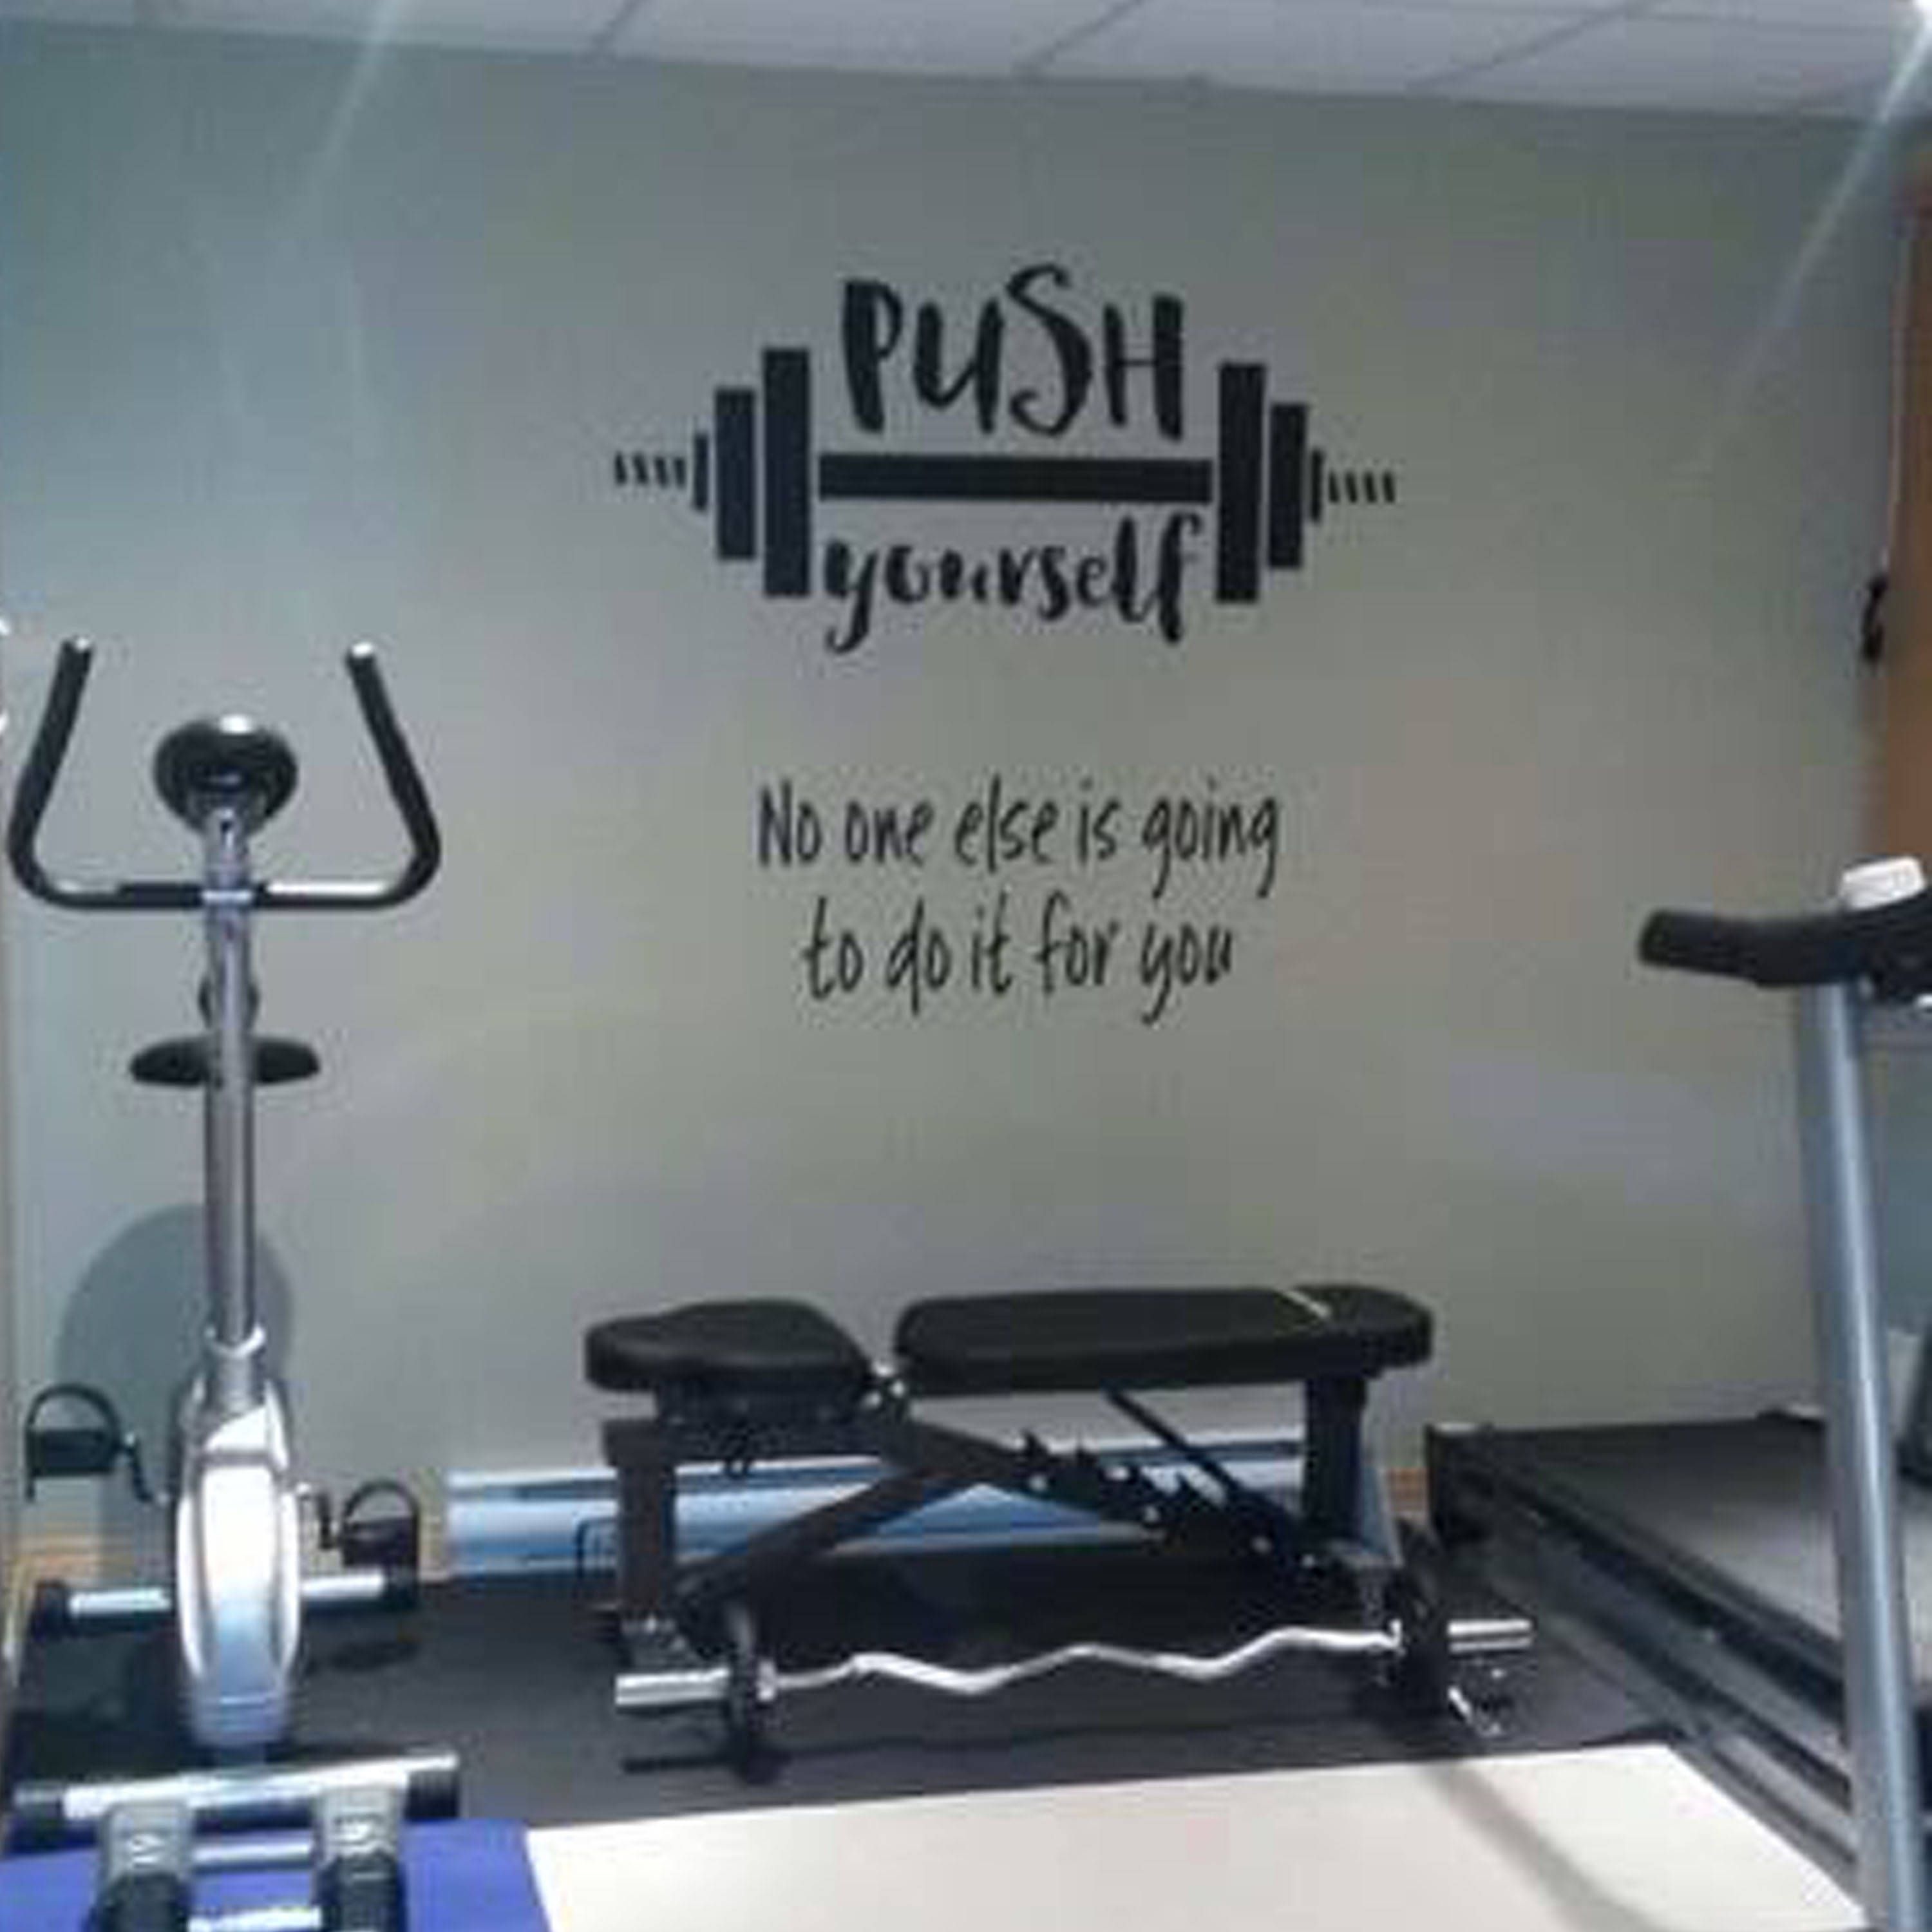 Push yourself No one else is going to do it for you, Workout Room Wall Vinyl, Weight room Exercise room home gym wall art wall decal HH2169 - Push yourself No one else is going to do it for you, Workout Room Wall Vinyl, Weight room Exercise room home gym wall art wall decal HH2169 -   16 home fitness Room ideas